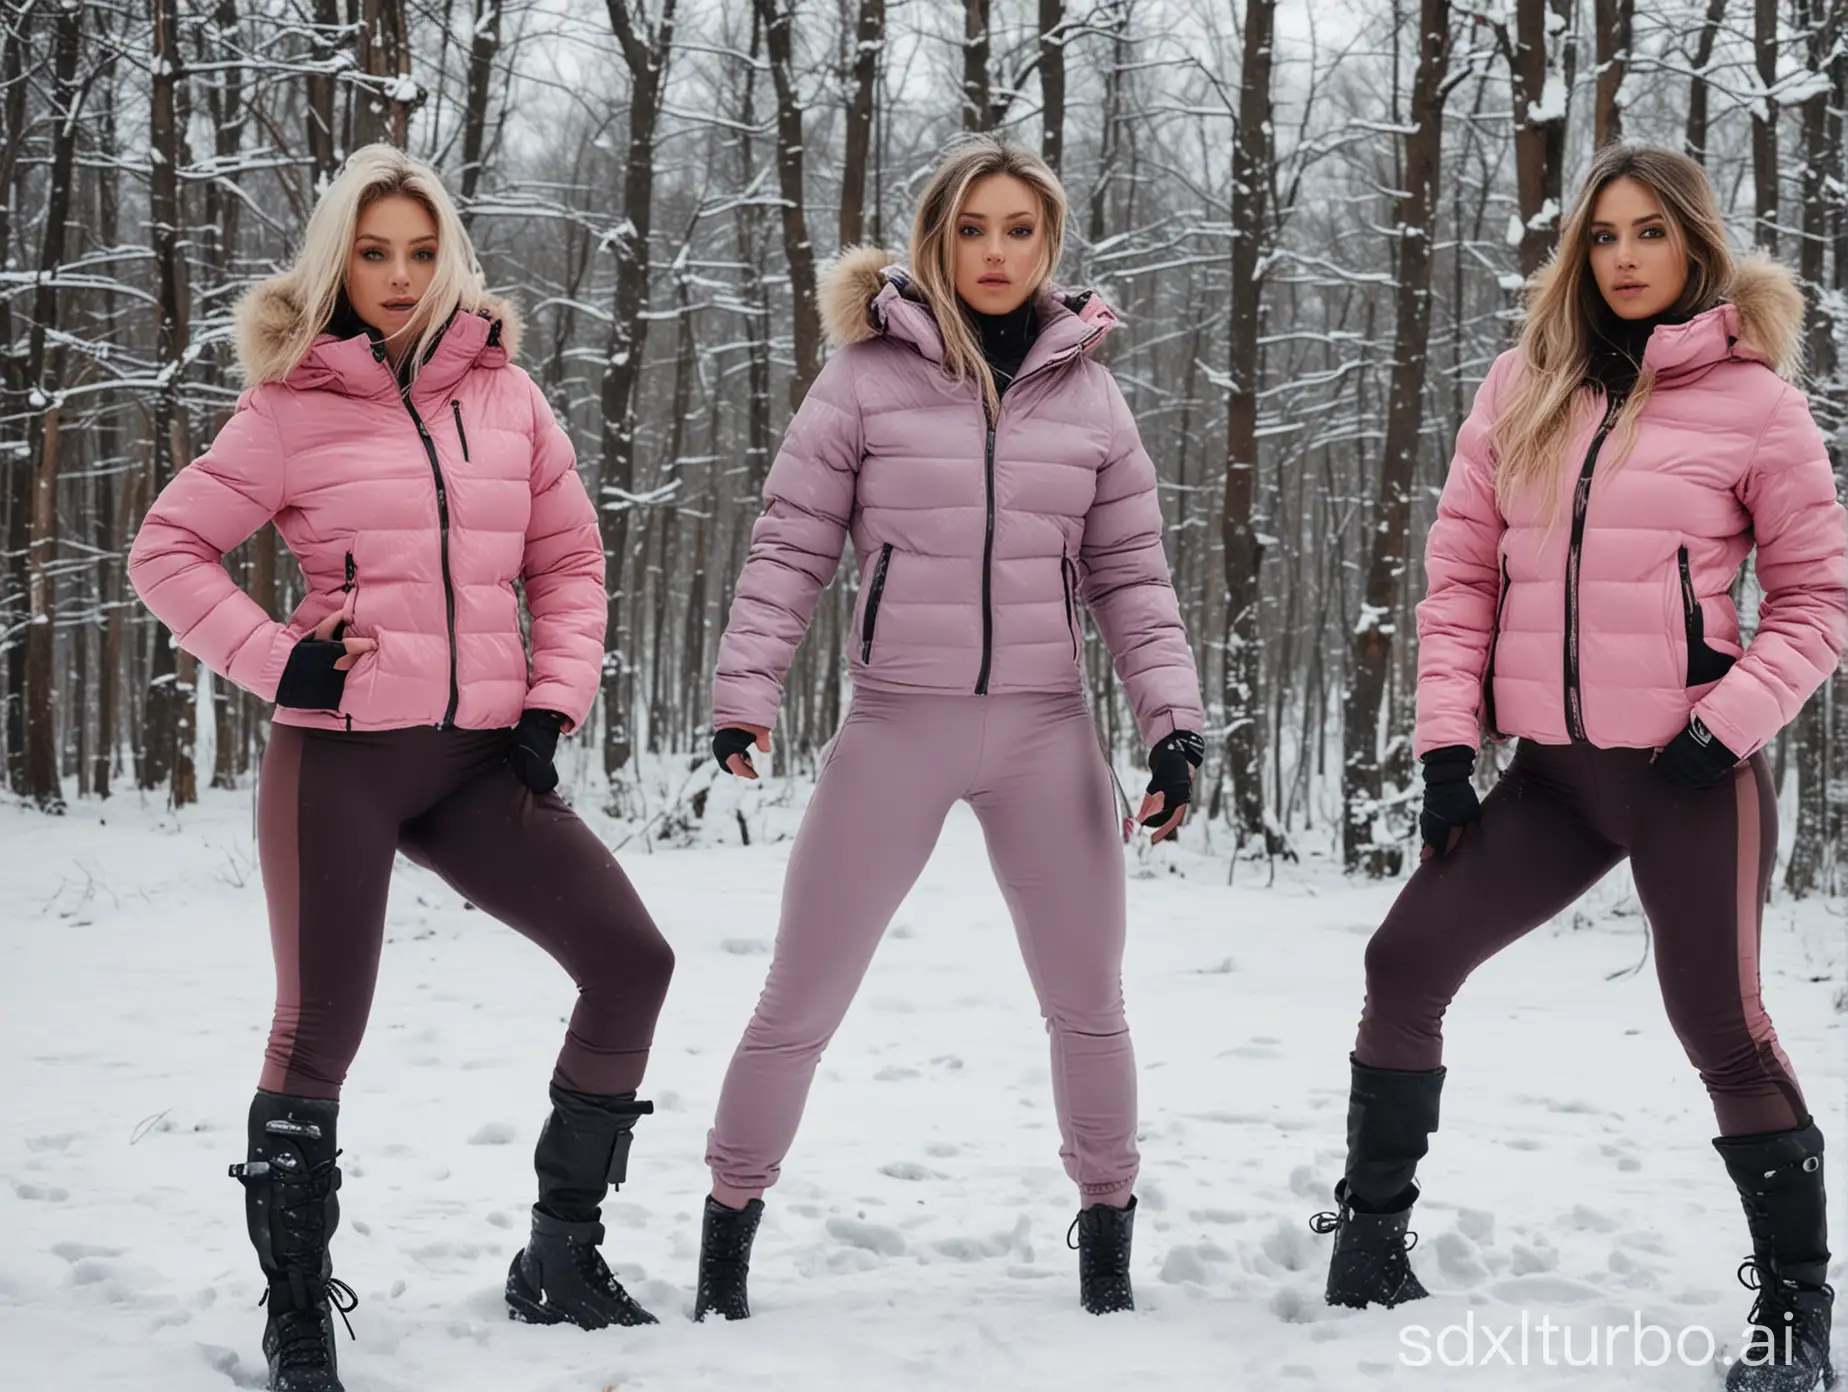 3 sexy women in thick down jackets with different colours workout in snow